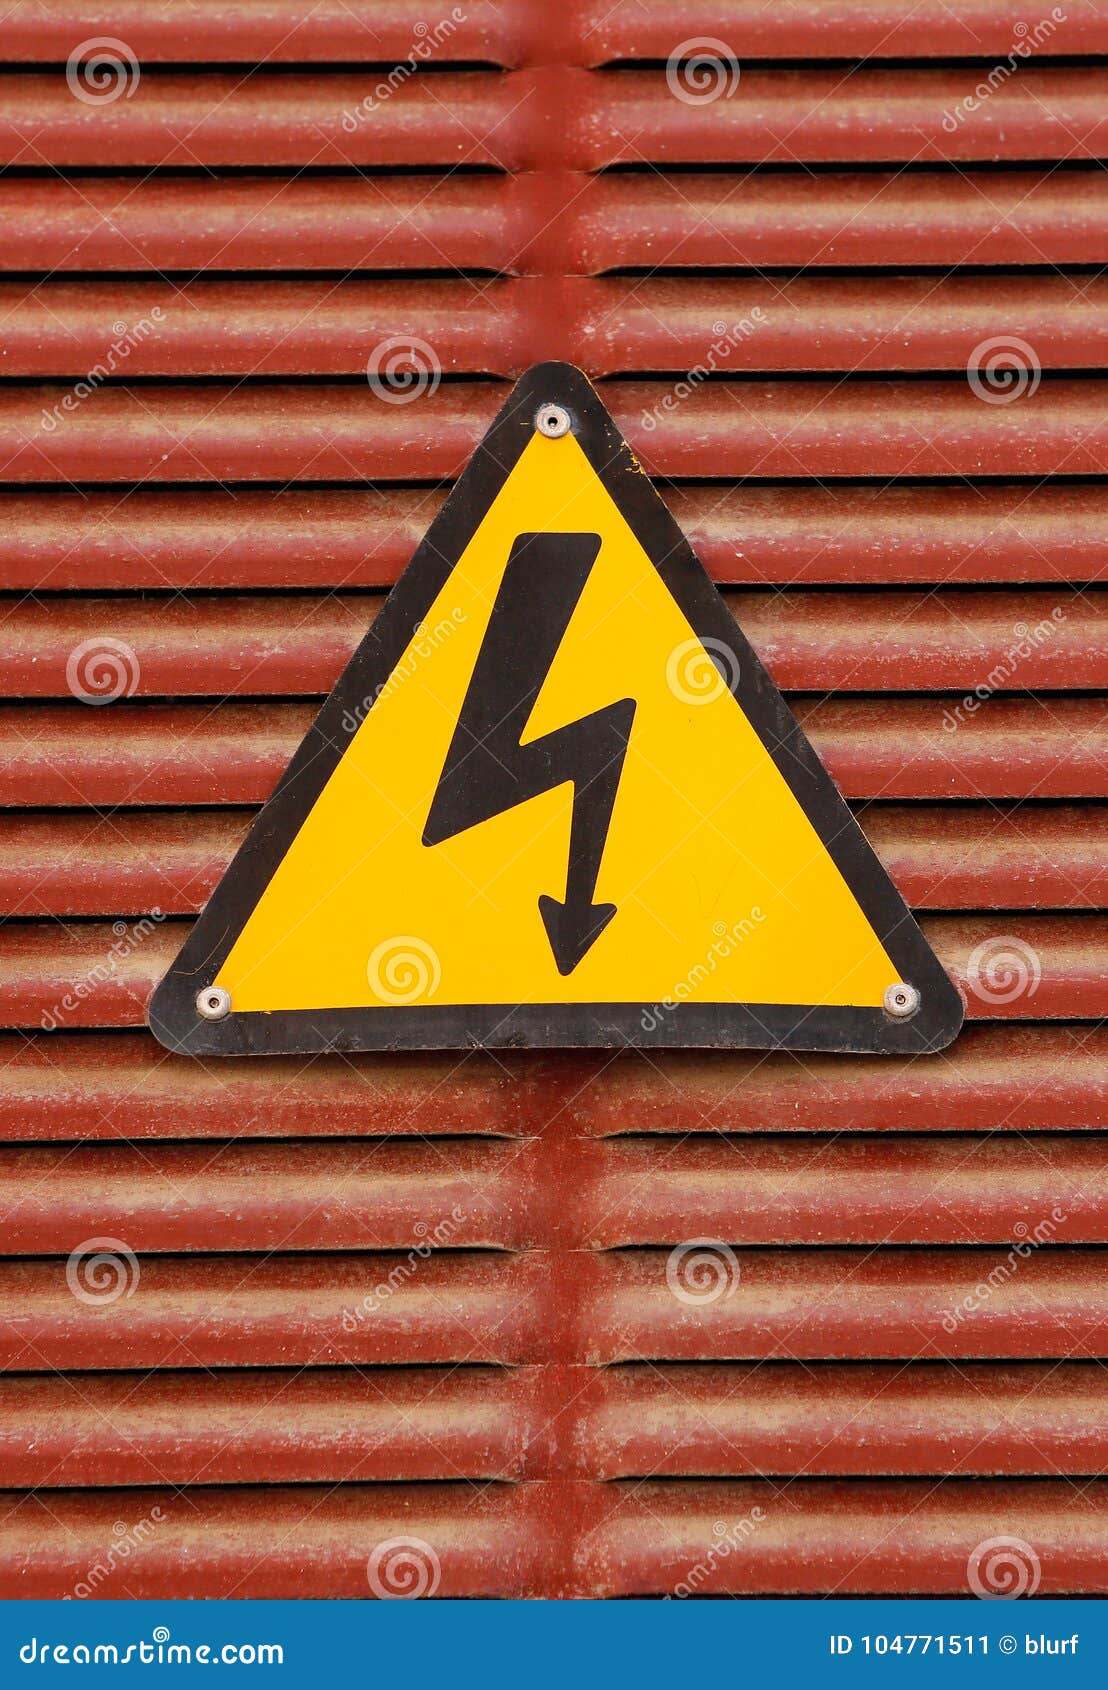 electric hazard advert sign on a red metal wall background